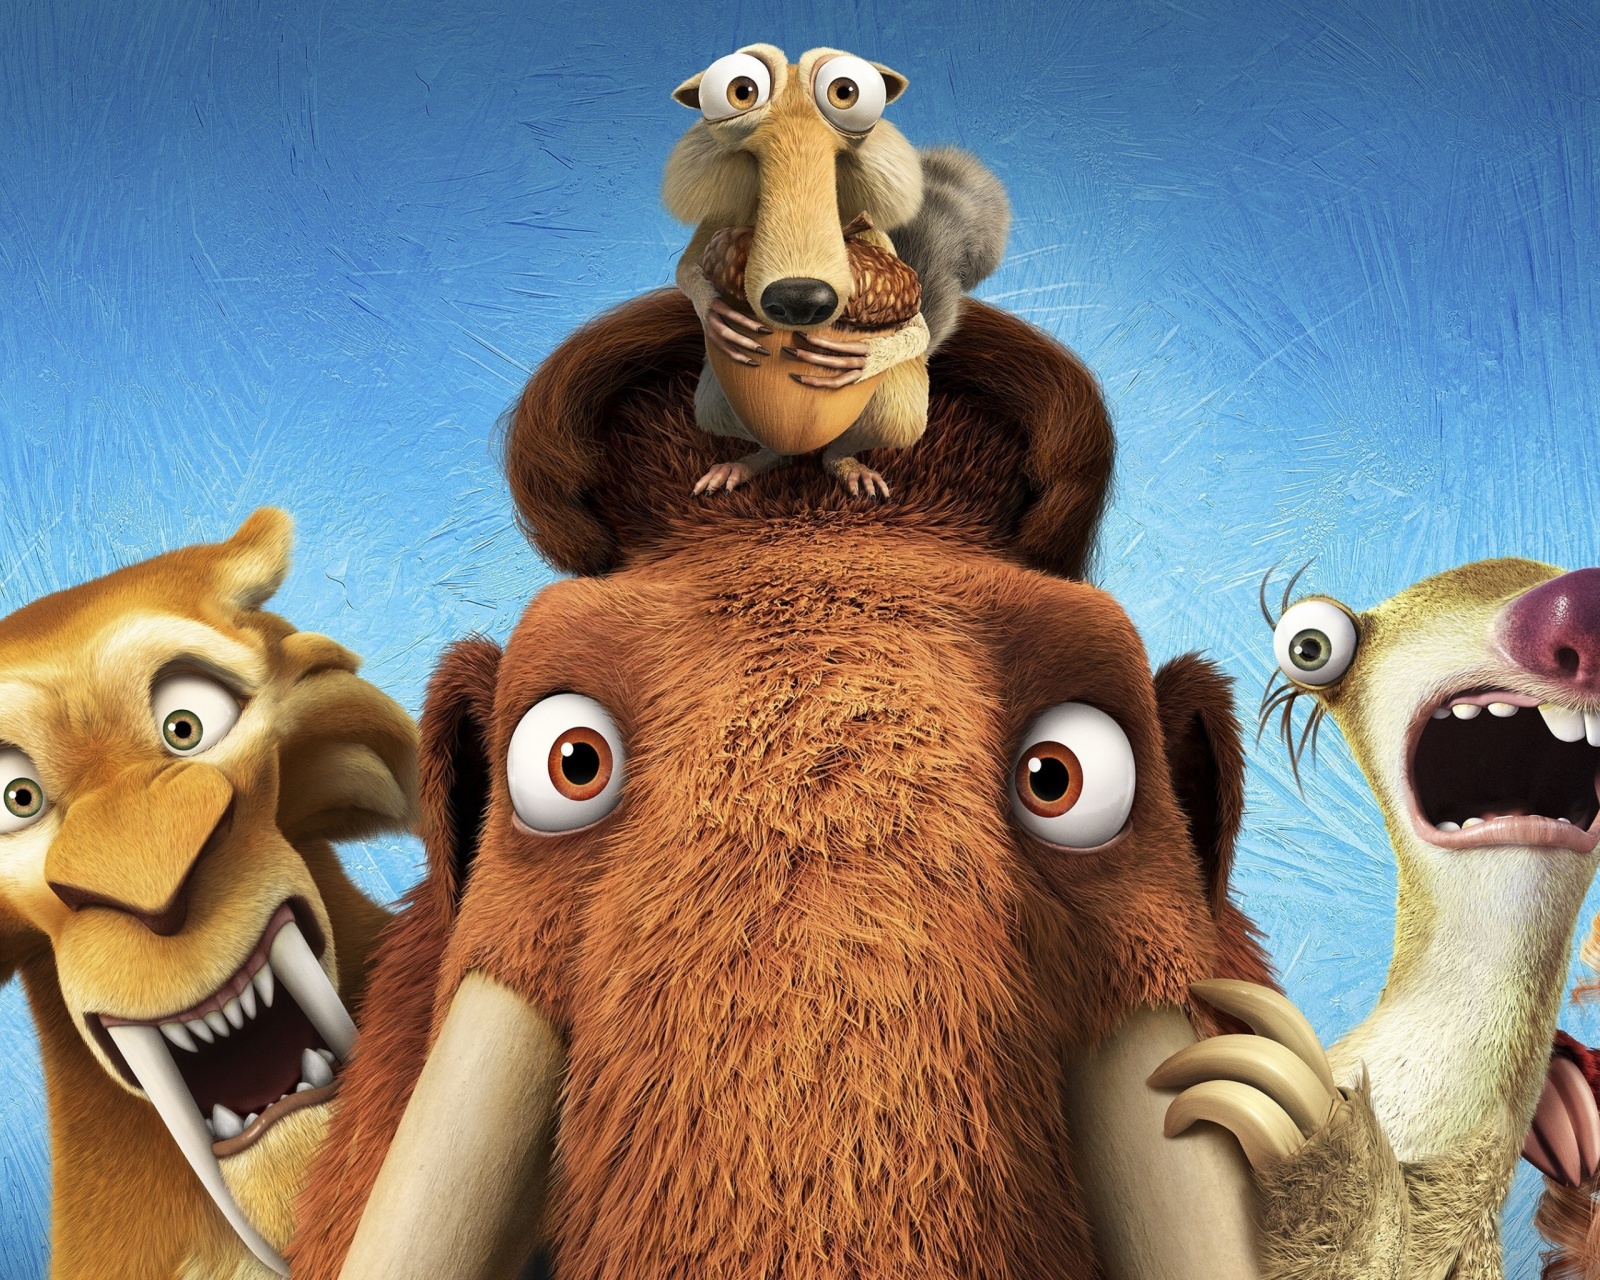 Ice Age 5 Collision Course with Diego, Manny, Scrat, Sid, Mammoths wallpaper 1600x1280